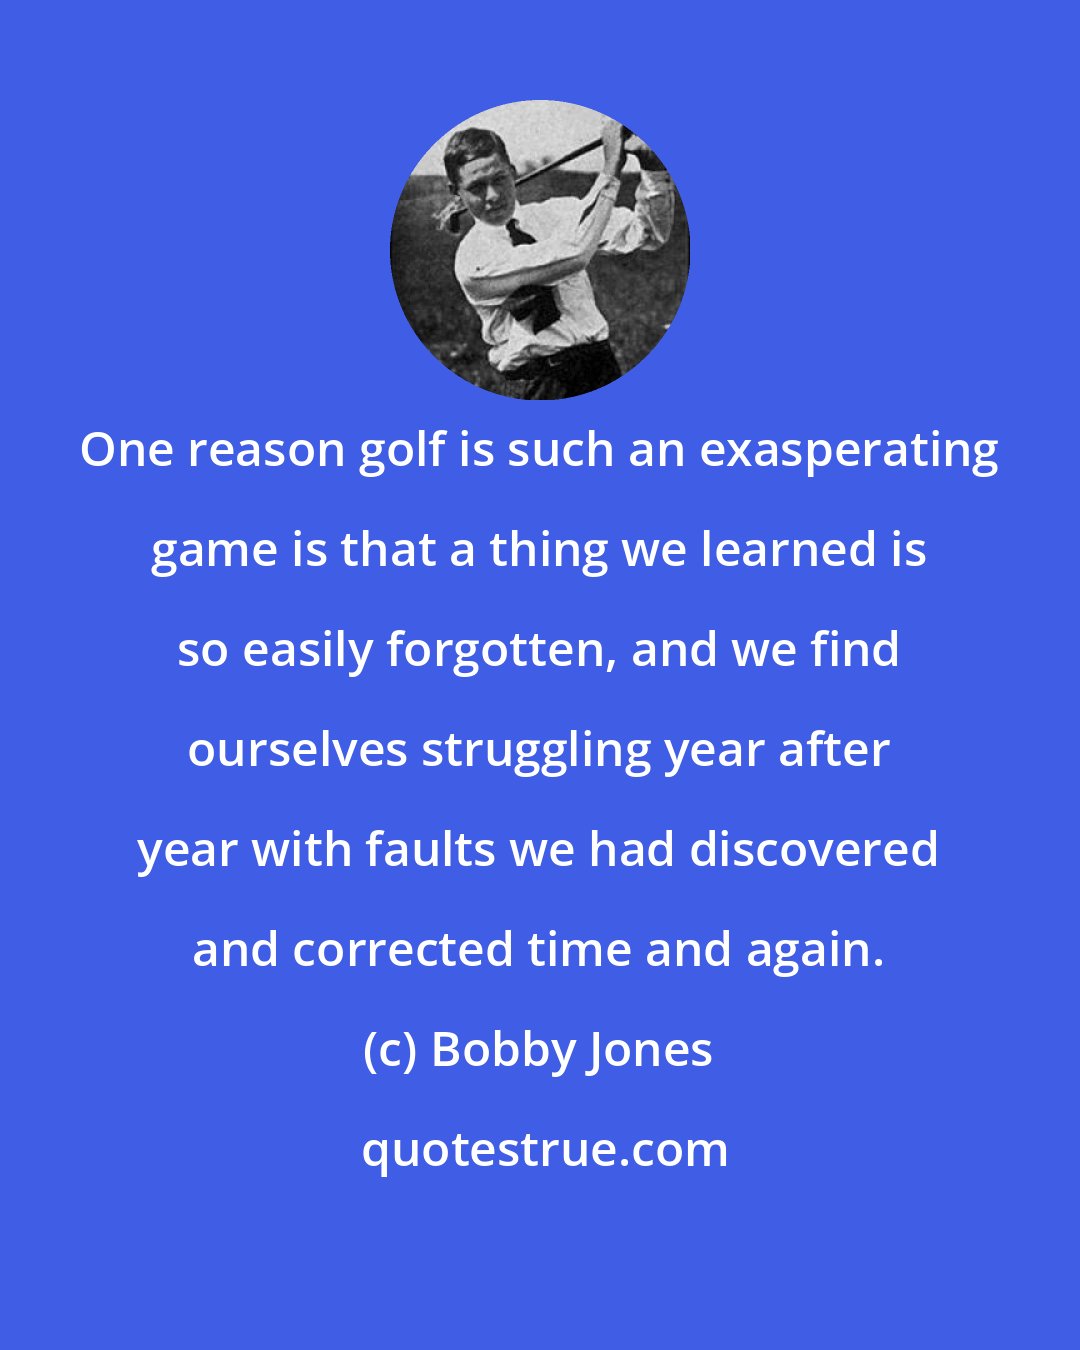 Bobby Jones: One reason golf is such an exasperating game is that a thing we learned is so easily forgotten, and we find ourselves struggling year after year with faults we had discovered and corrected time and again.